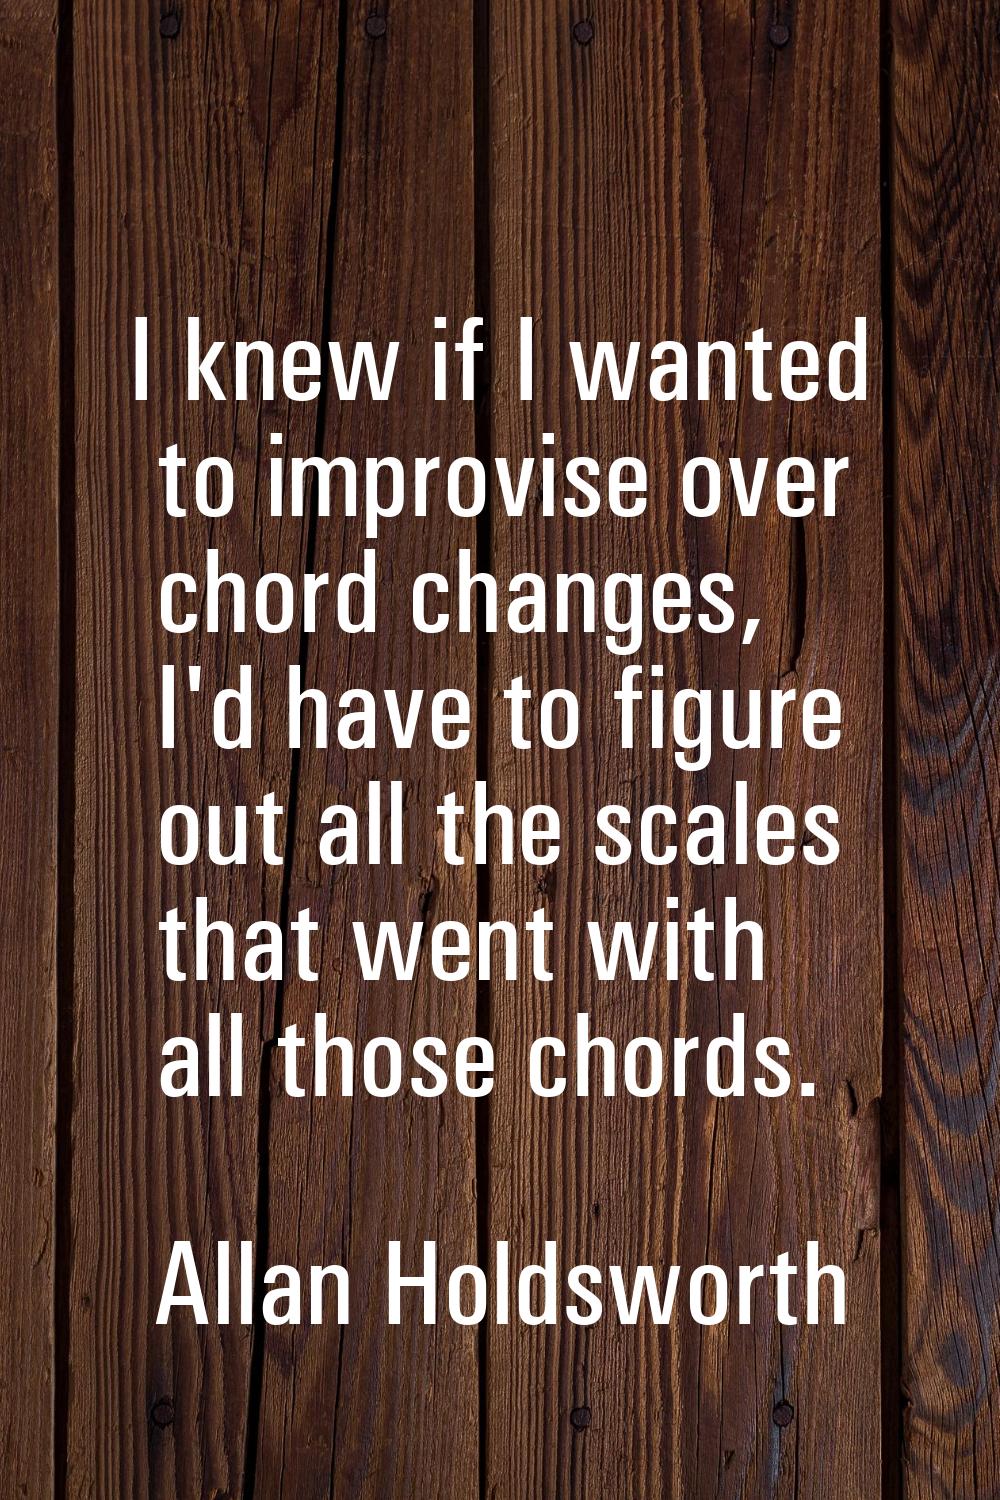 I knew if I wanted to improvise over chord changes, I'd have to figure out all the scales that went